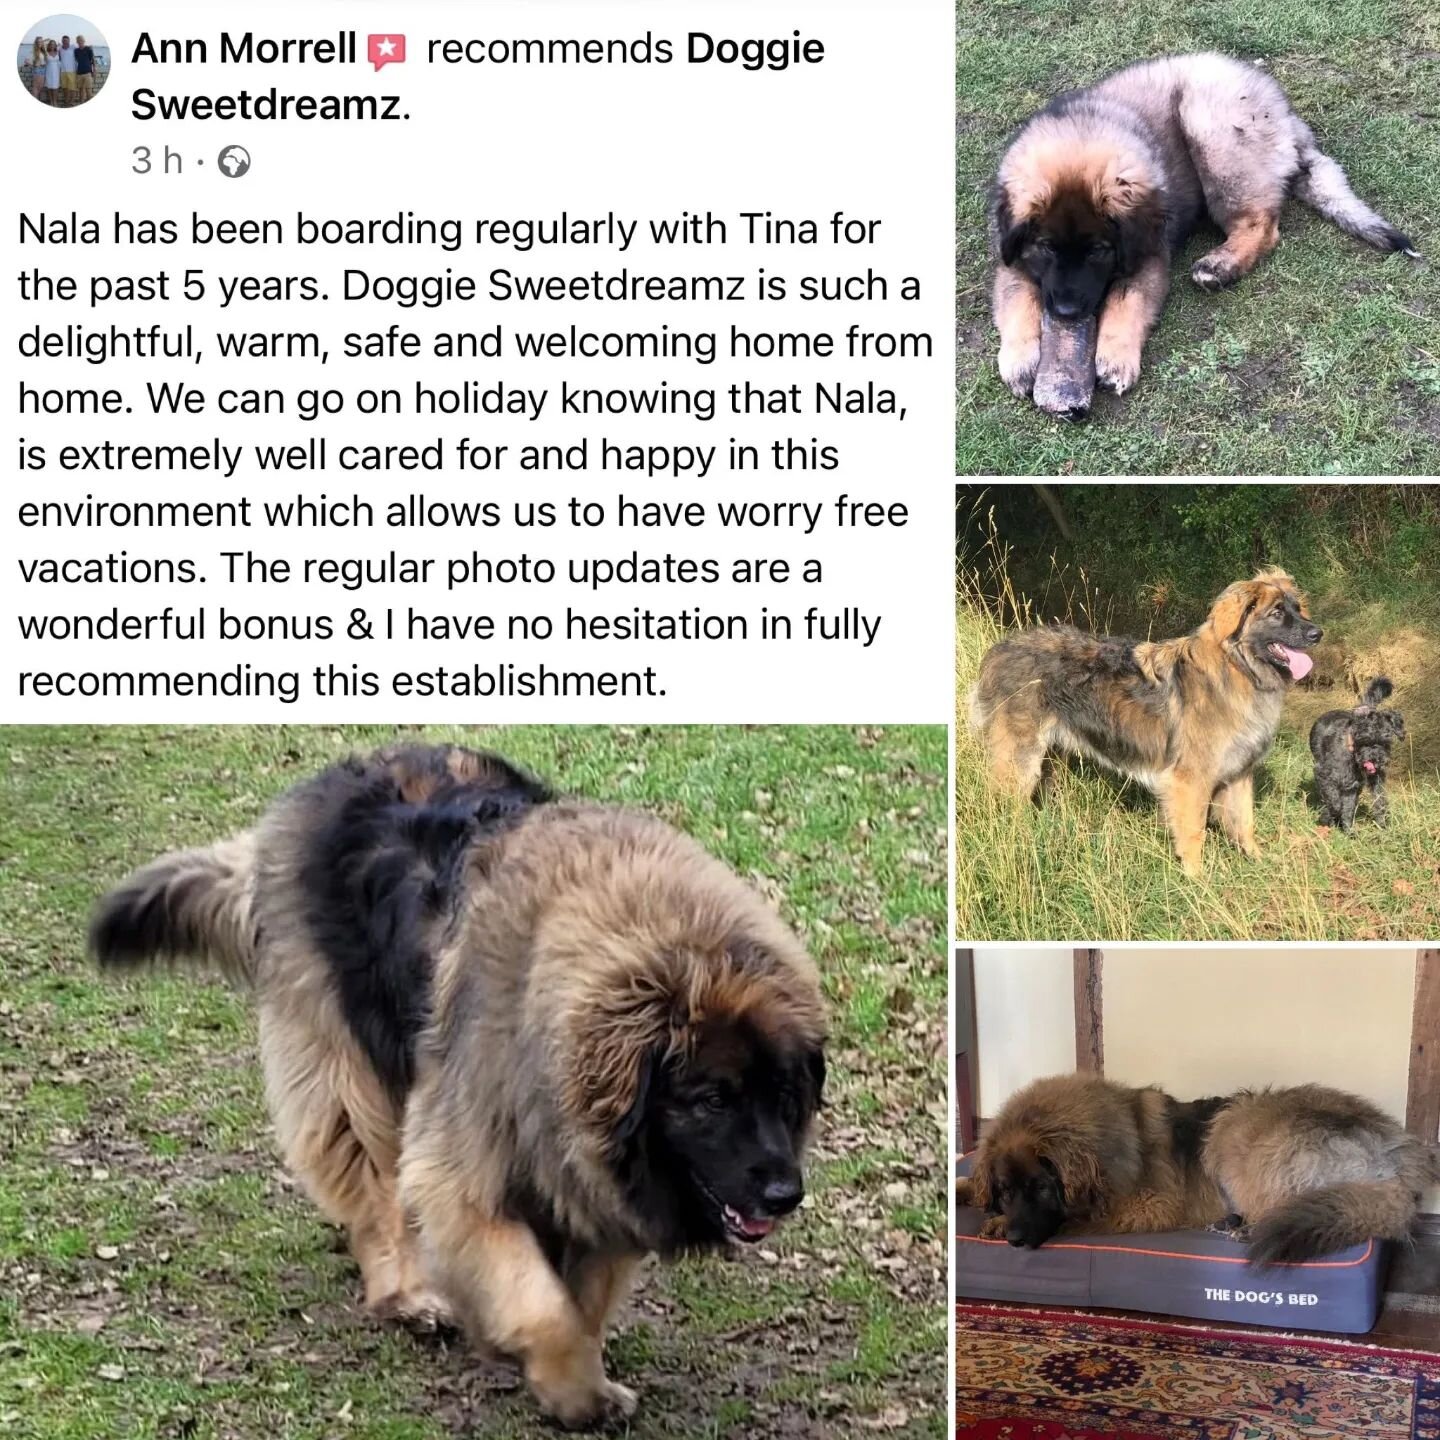 Where have the last 5 years gone? We love watching the dogs we look after growing up. From 14 weeks to 5.5 years and counting!

#leonberger #review #grateful #thankyou #growingup #loyalcustomer #homefromhomedogboarding #homefromhome #dogboarding